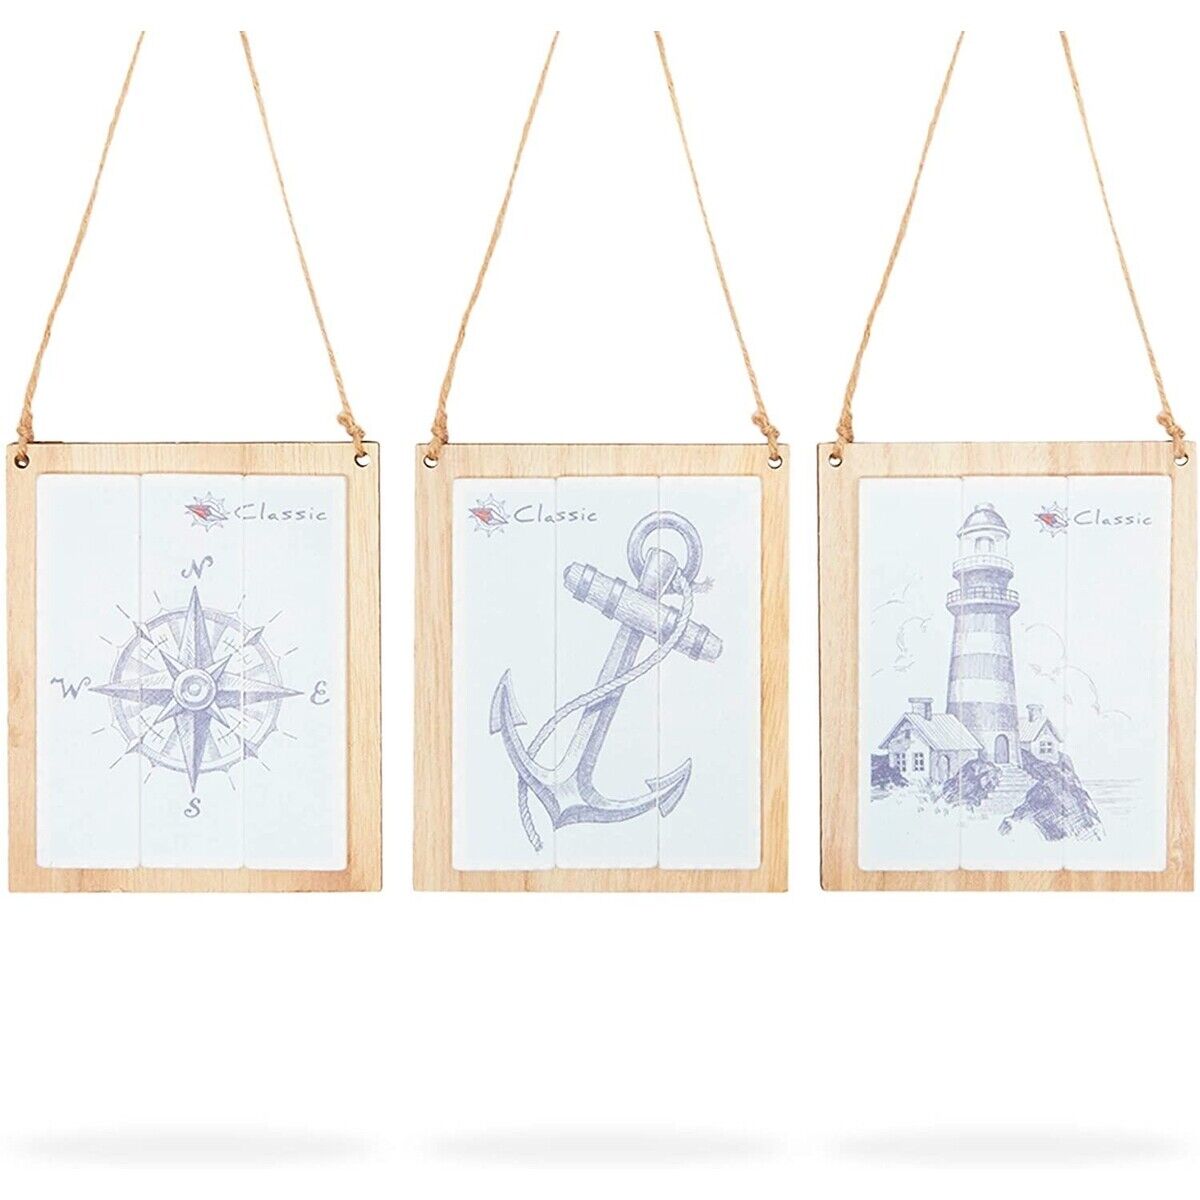 Nautical Wall Decor, Wooden Vintage Designs for Home Decor (5.5 x 4.7 In, 3x)